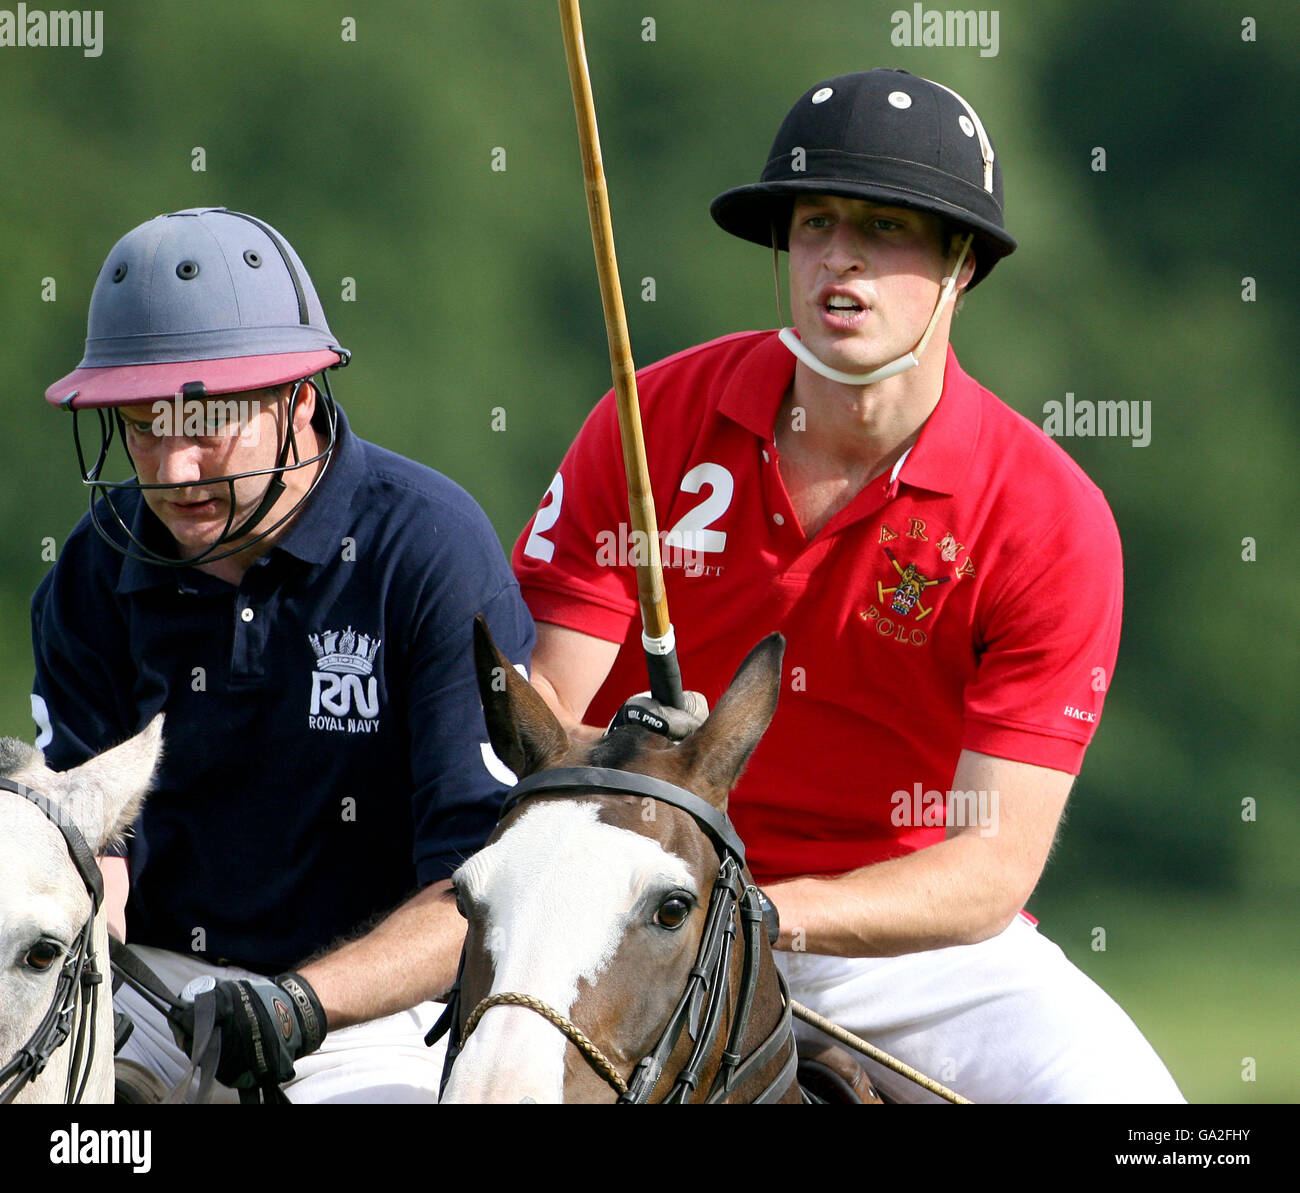 Prince William competes in the Rundle Cup Polo match at Tidworth Polo ...